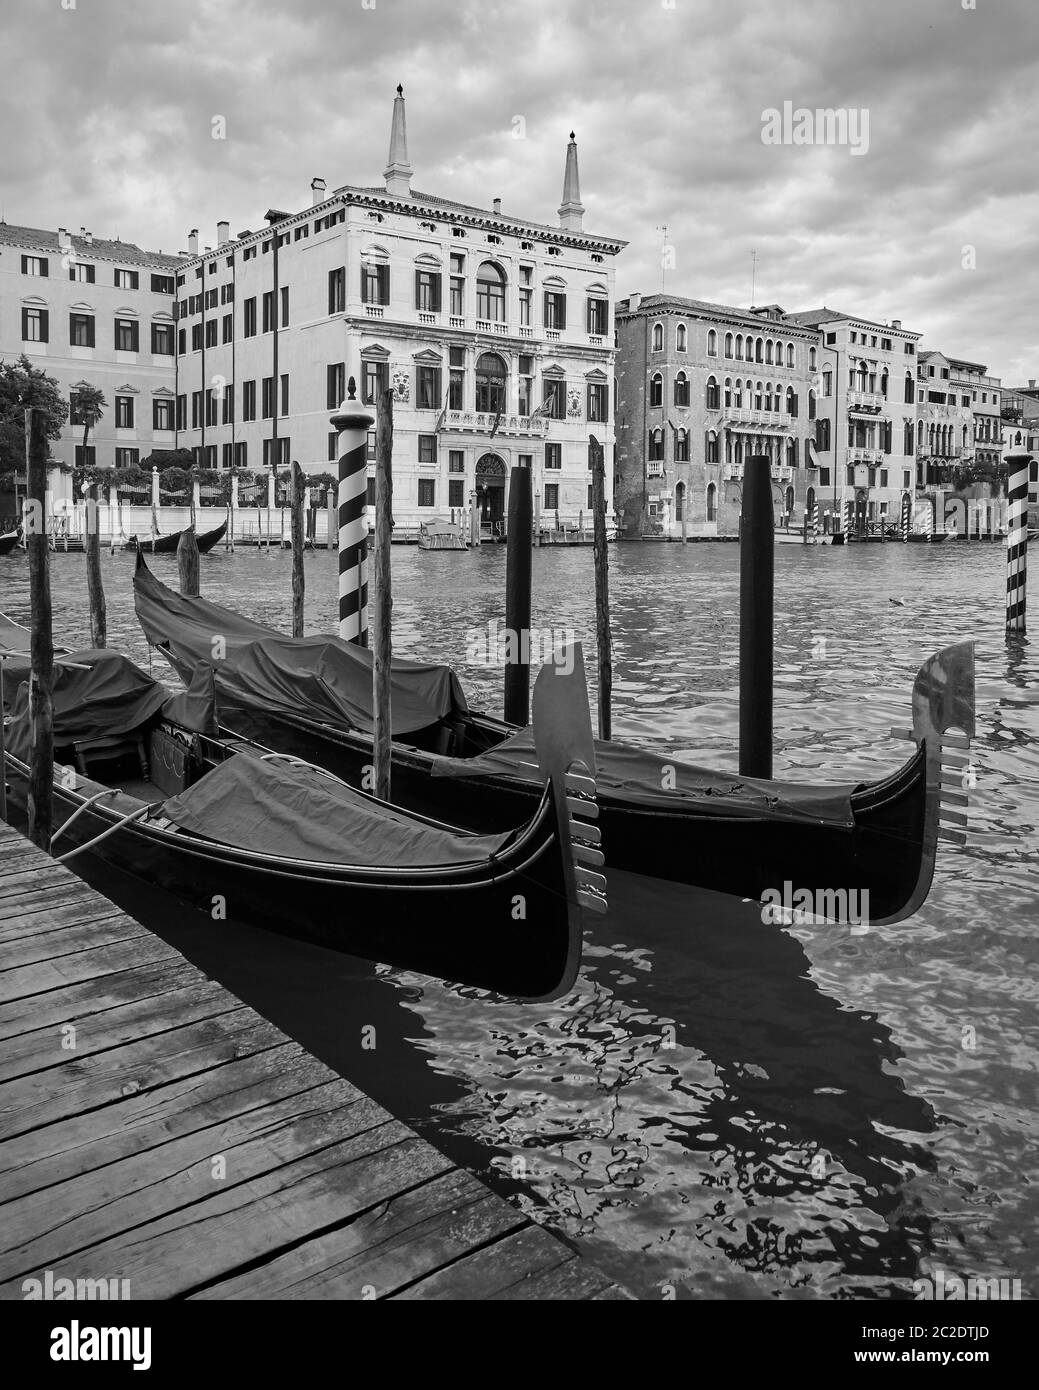 Moored gondolas on the Grand Canal in Venice, Italy. Black and white venetian view Stock Photo